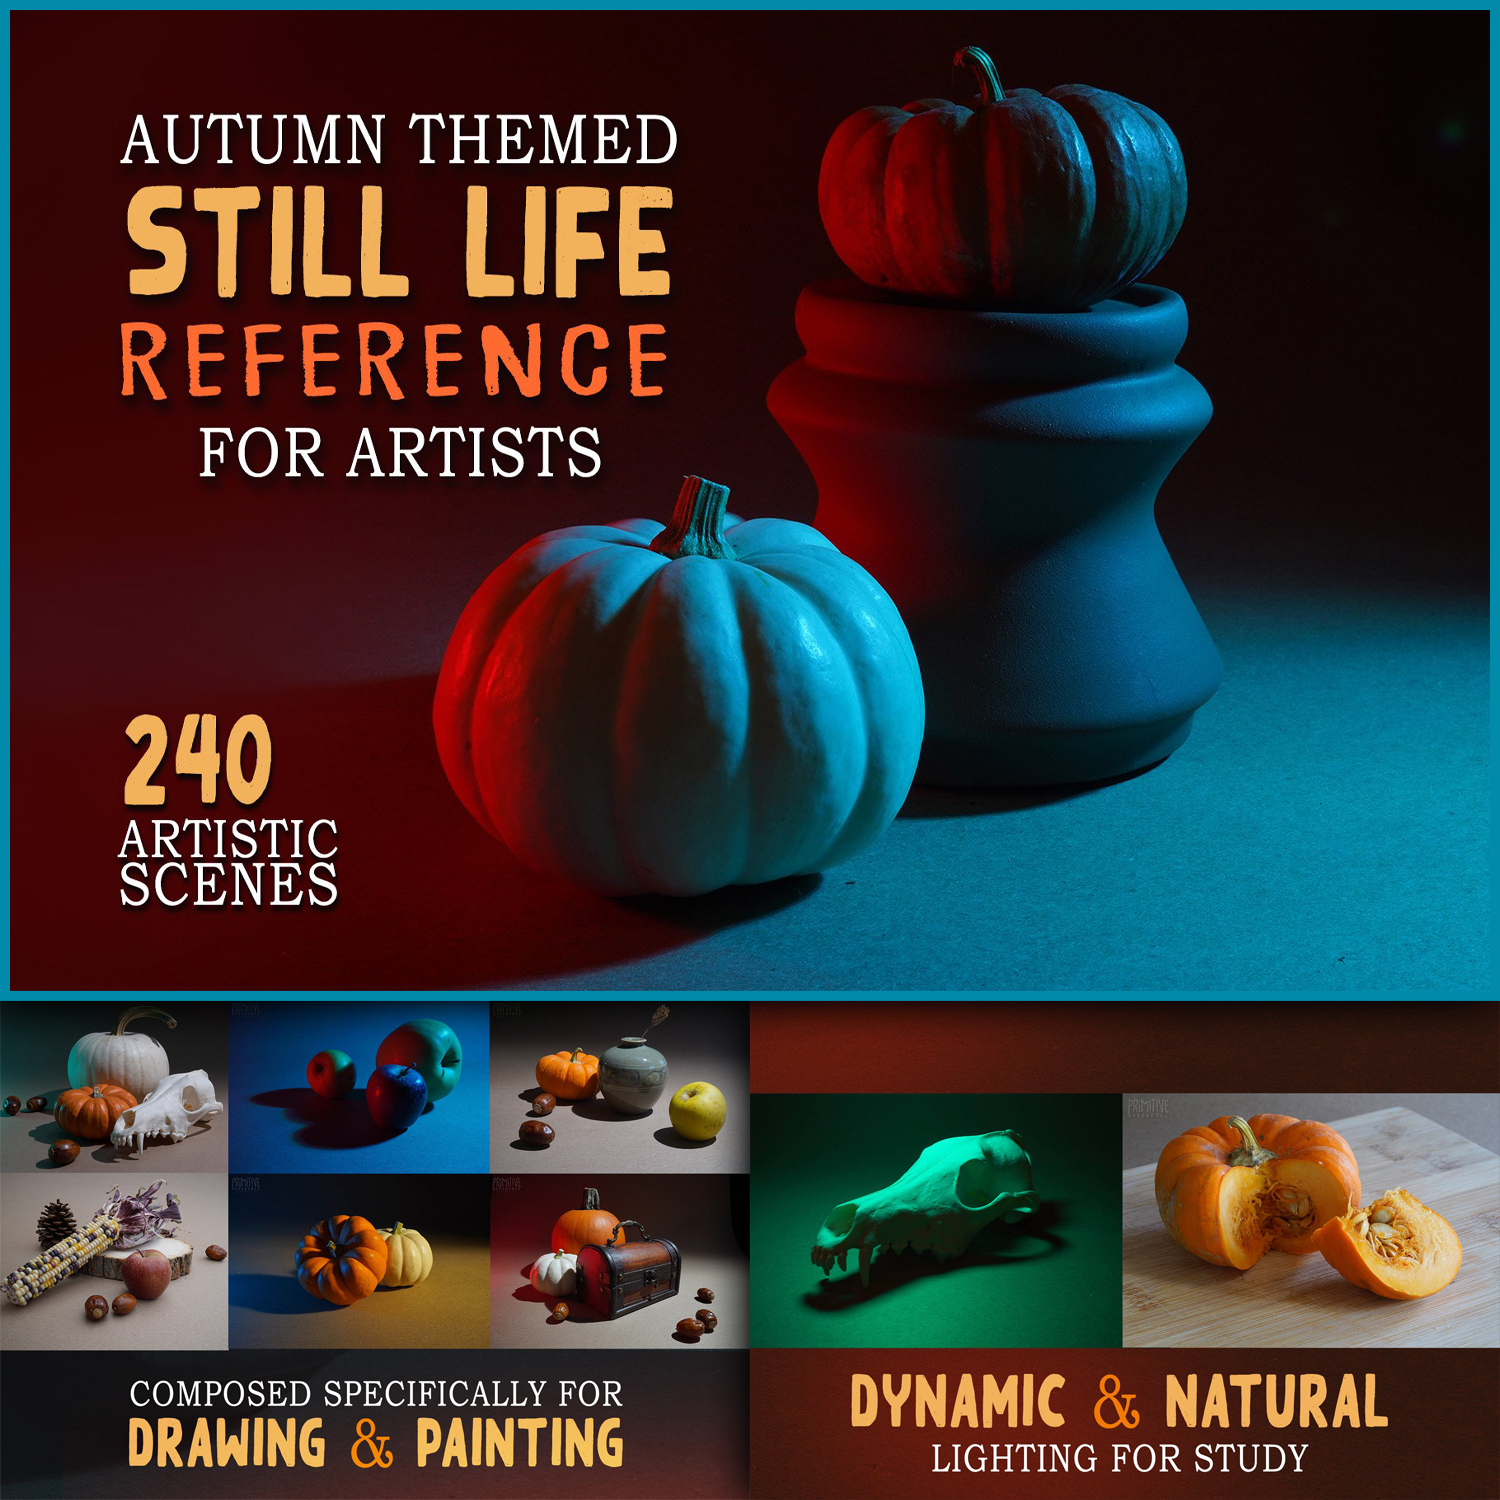 Images with autumn themed still life reference.